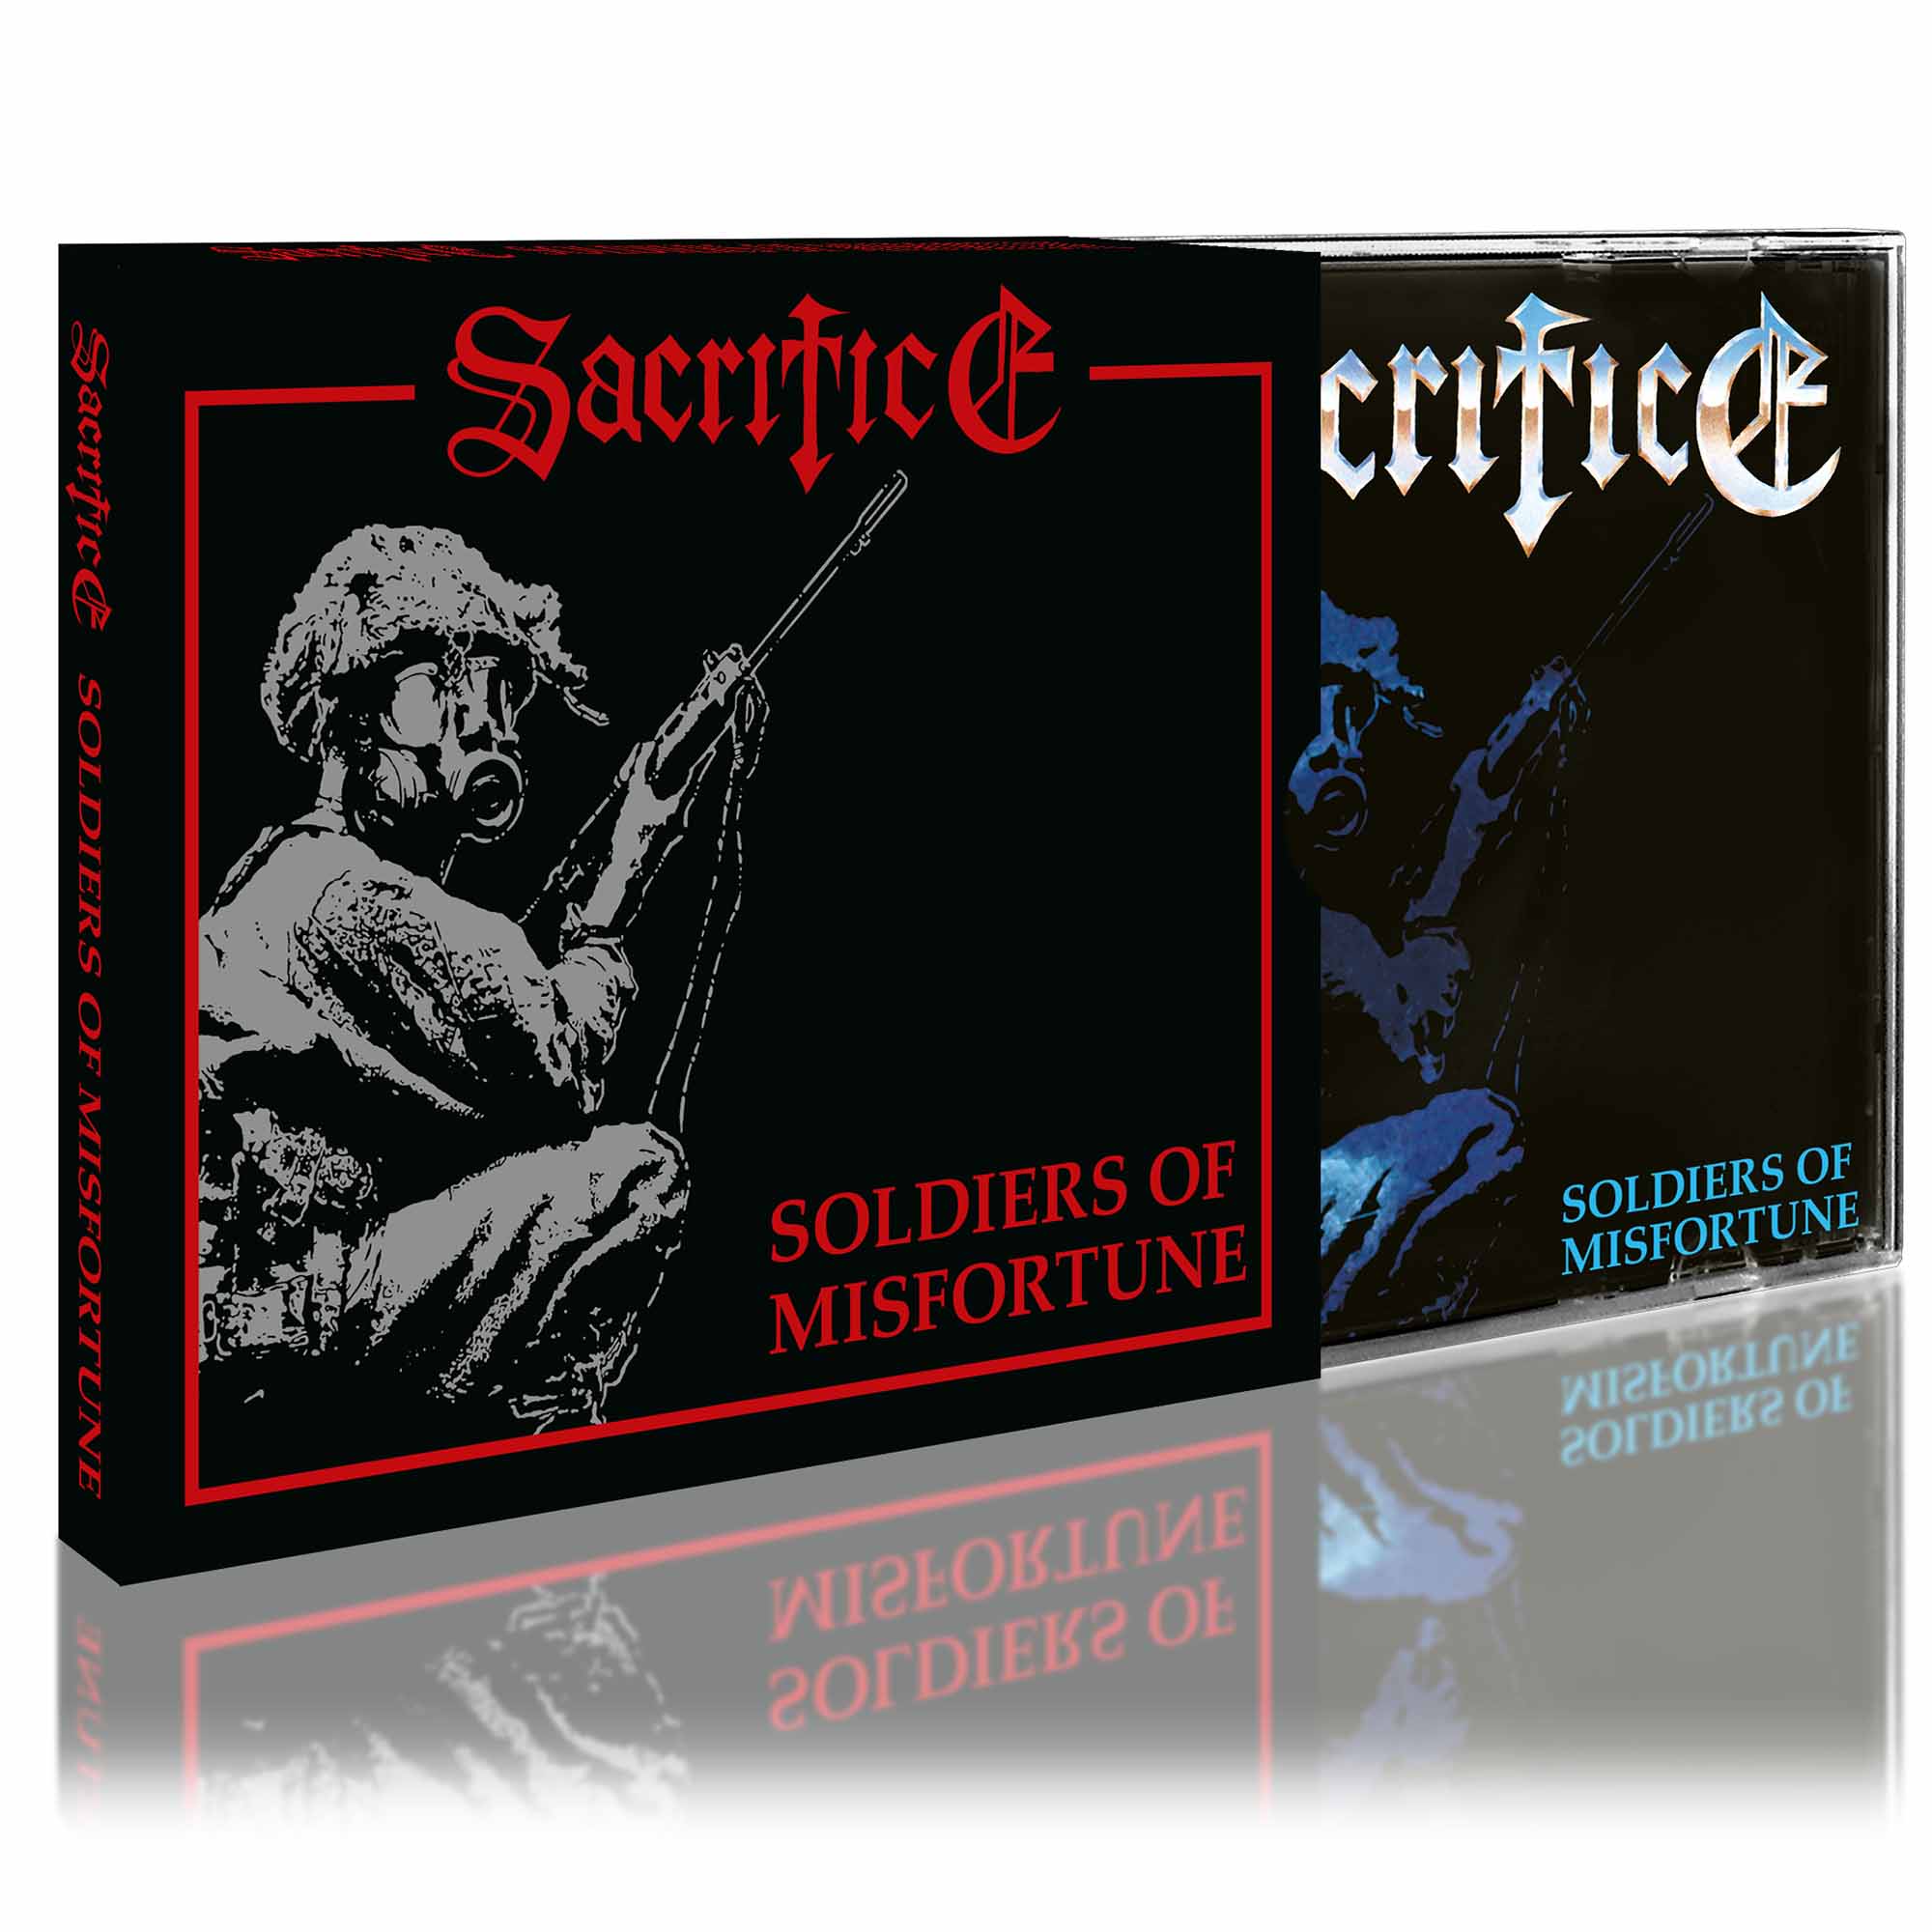 SACRIFICE - Soldiers of Misfortune  CD